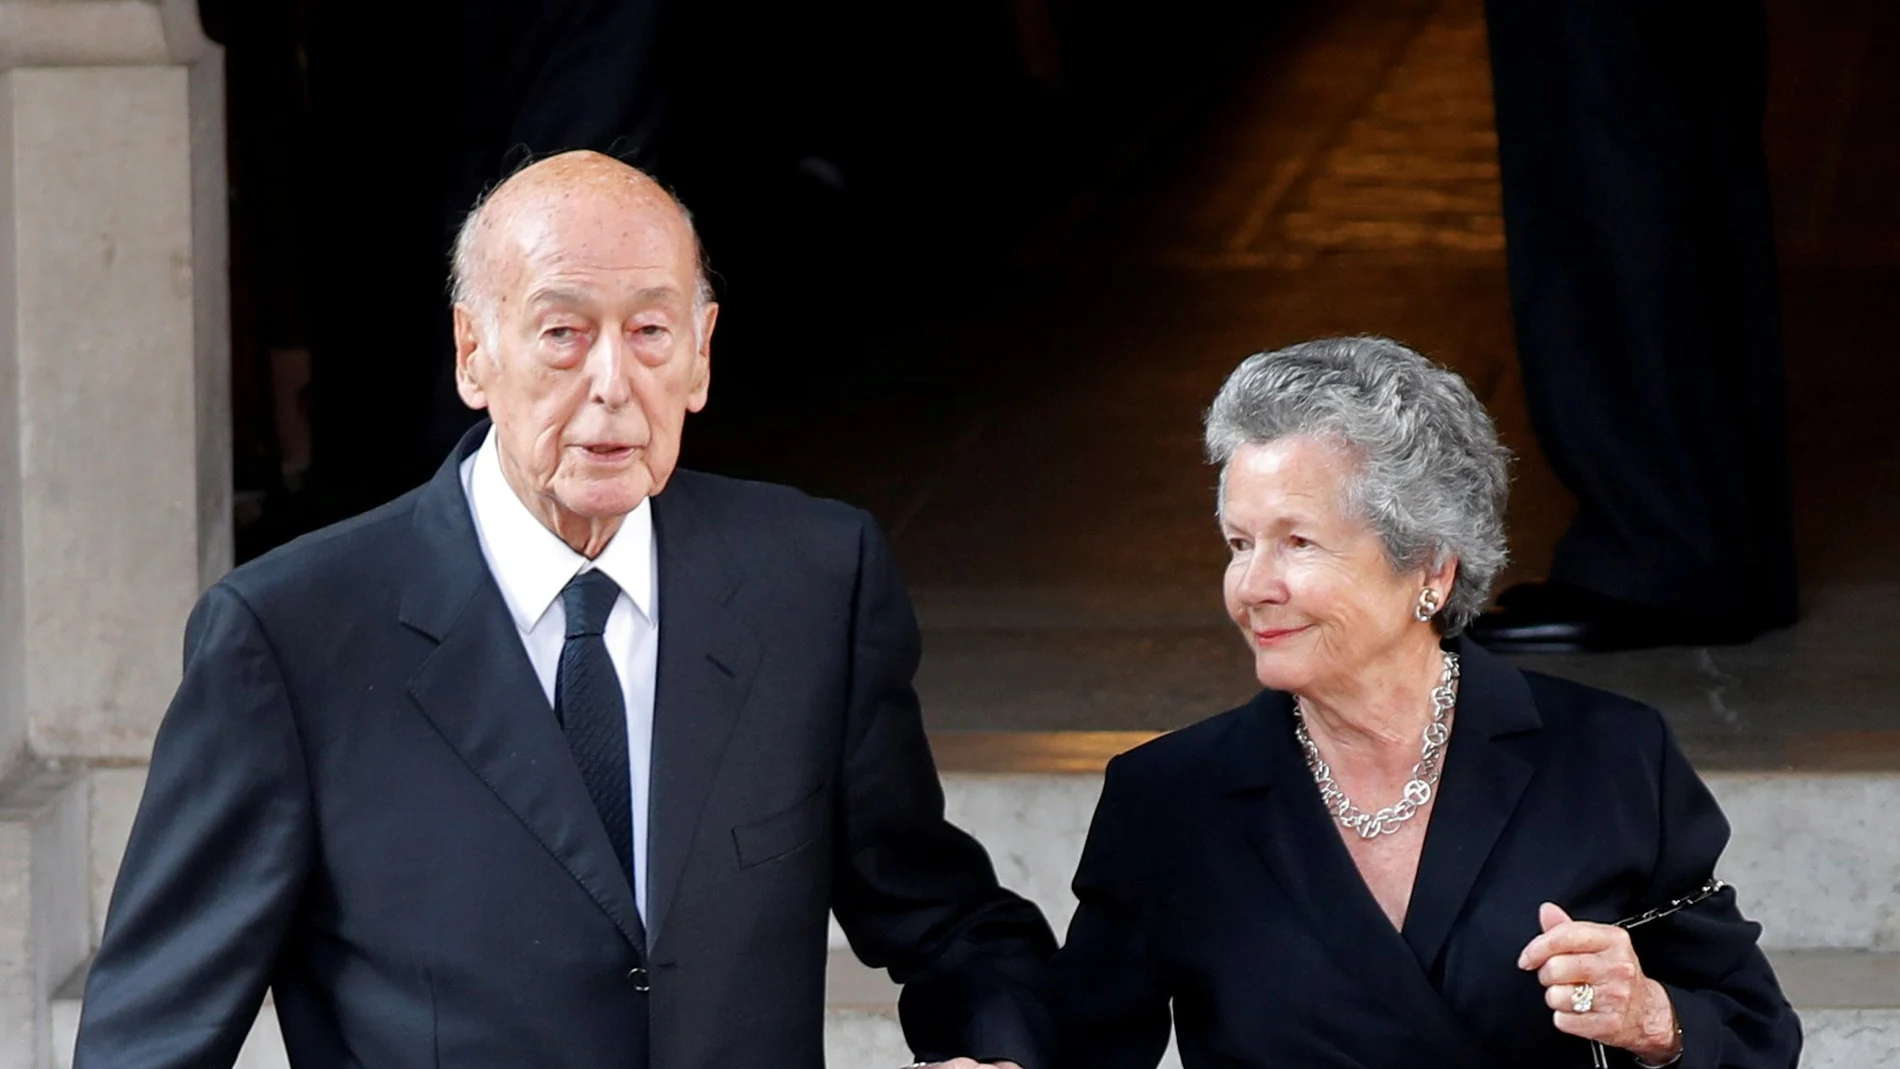 Valery Giscard d'Estaing (i) y su mujer Anemone (d). REUTERS/Charles Platiau/File Photo